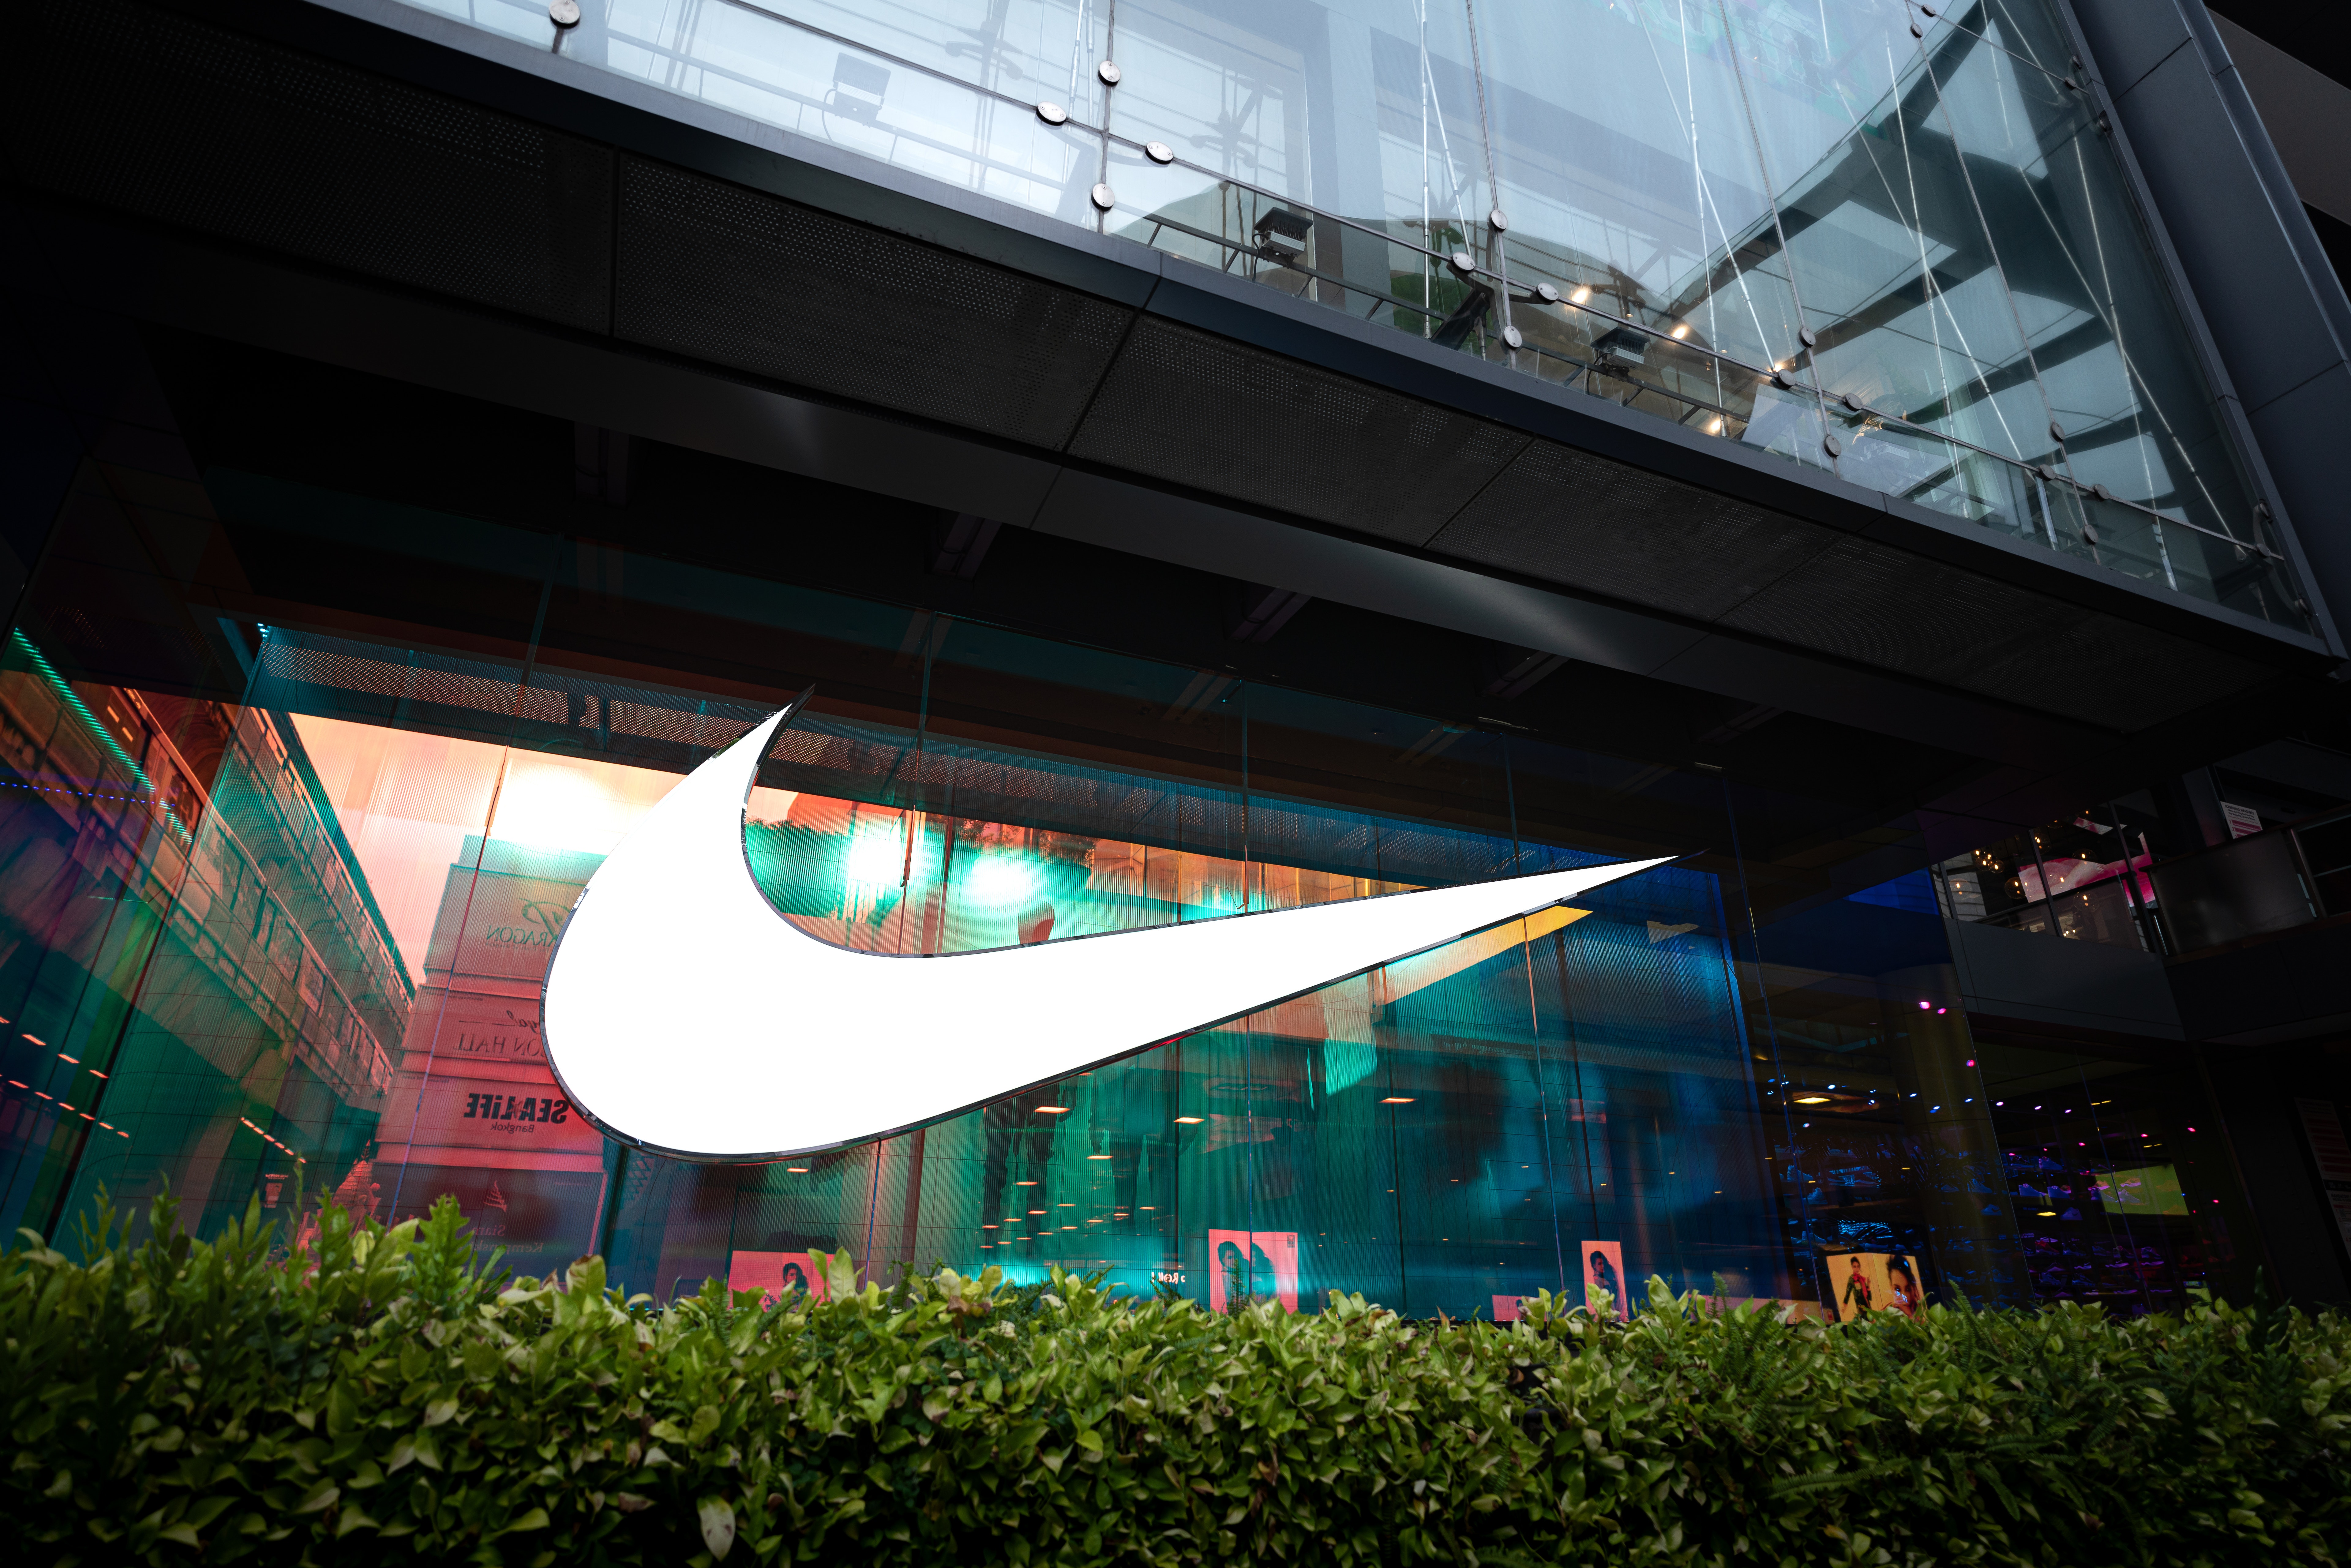 Nike Stock Is Down 40% This Year Despite Strong Performance: What Will Today&#39;s Earnings Call Reveal?